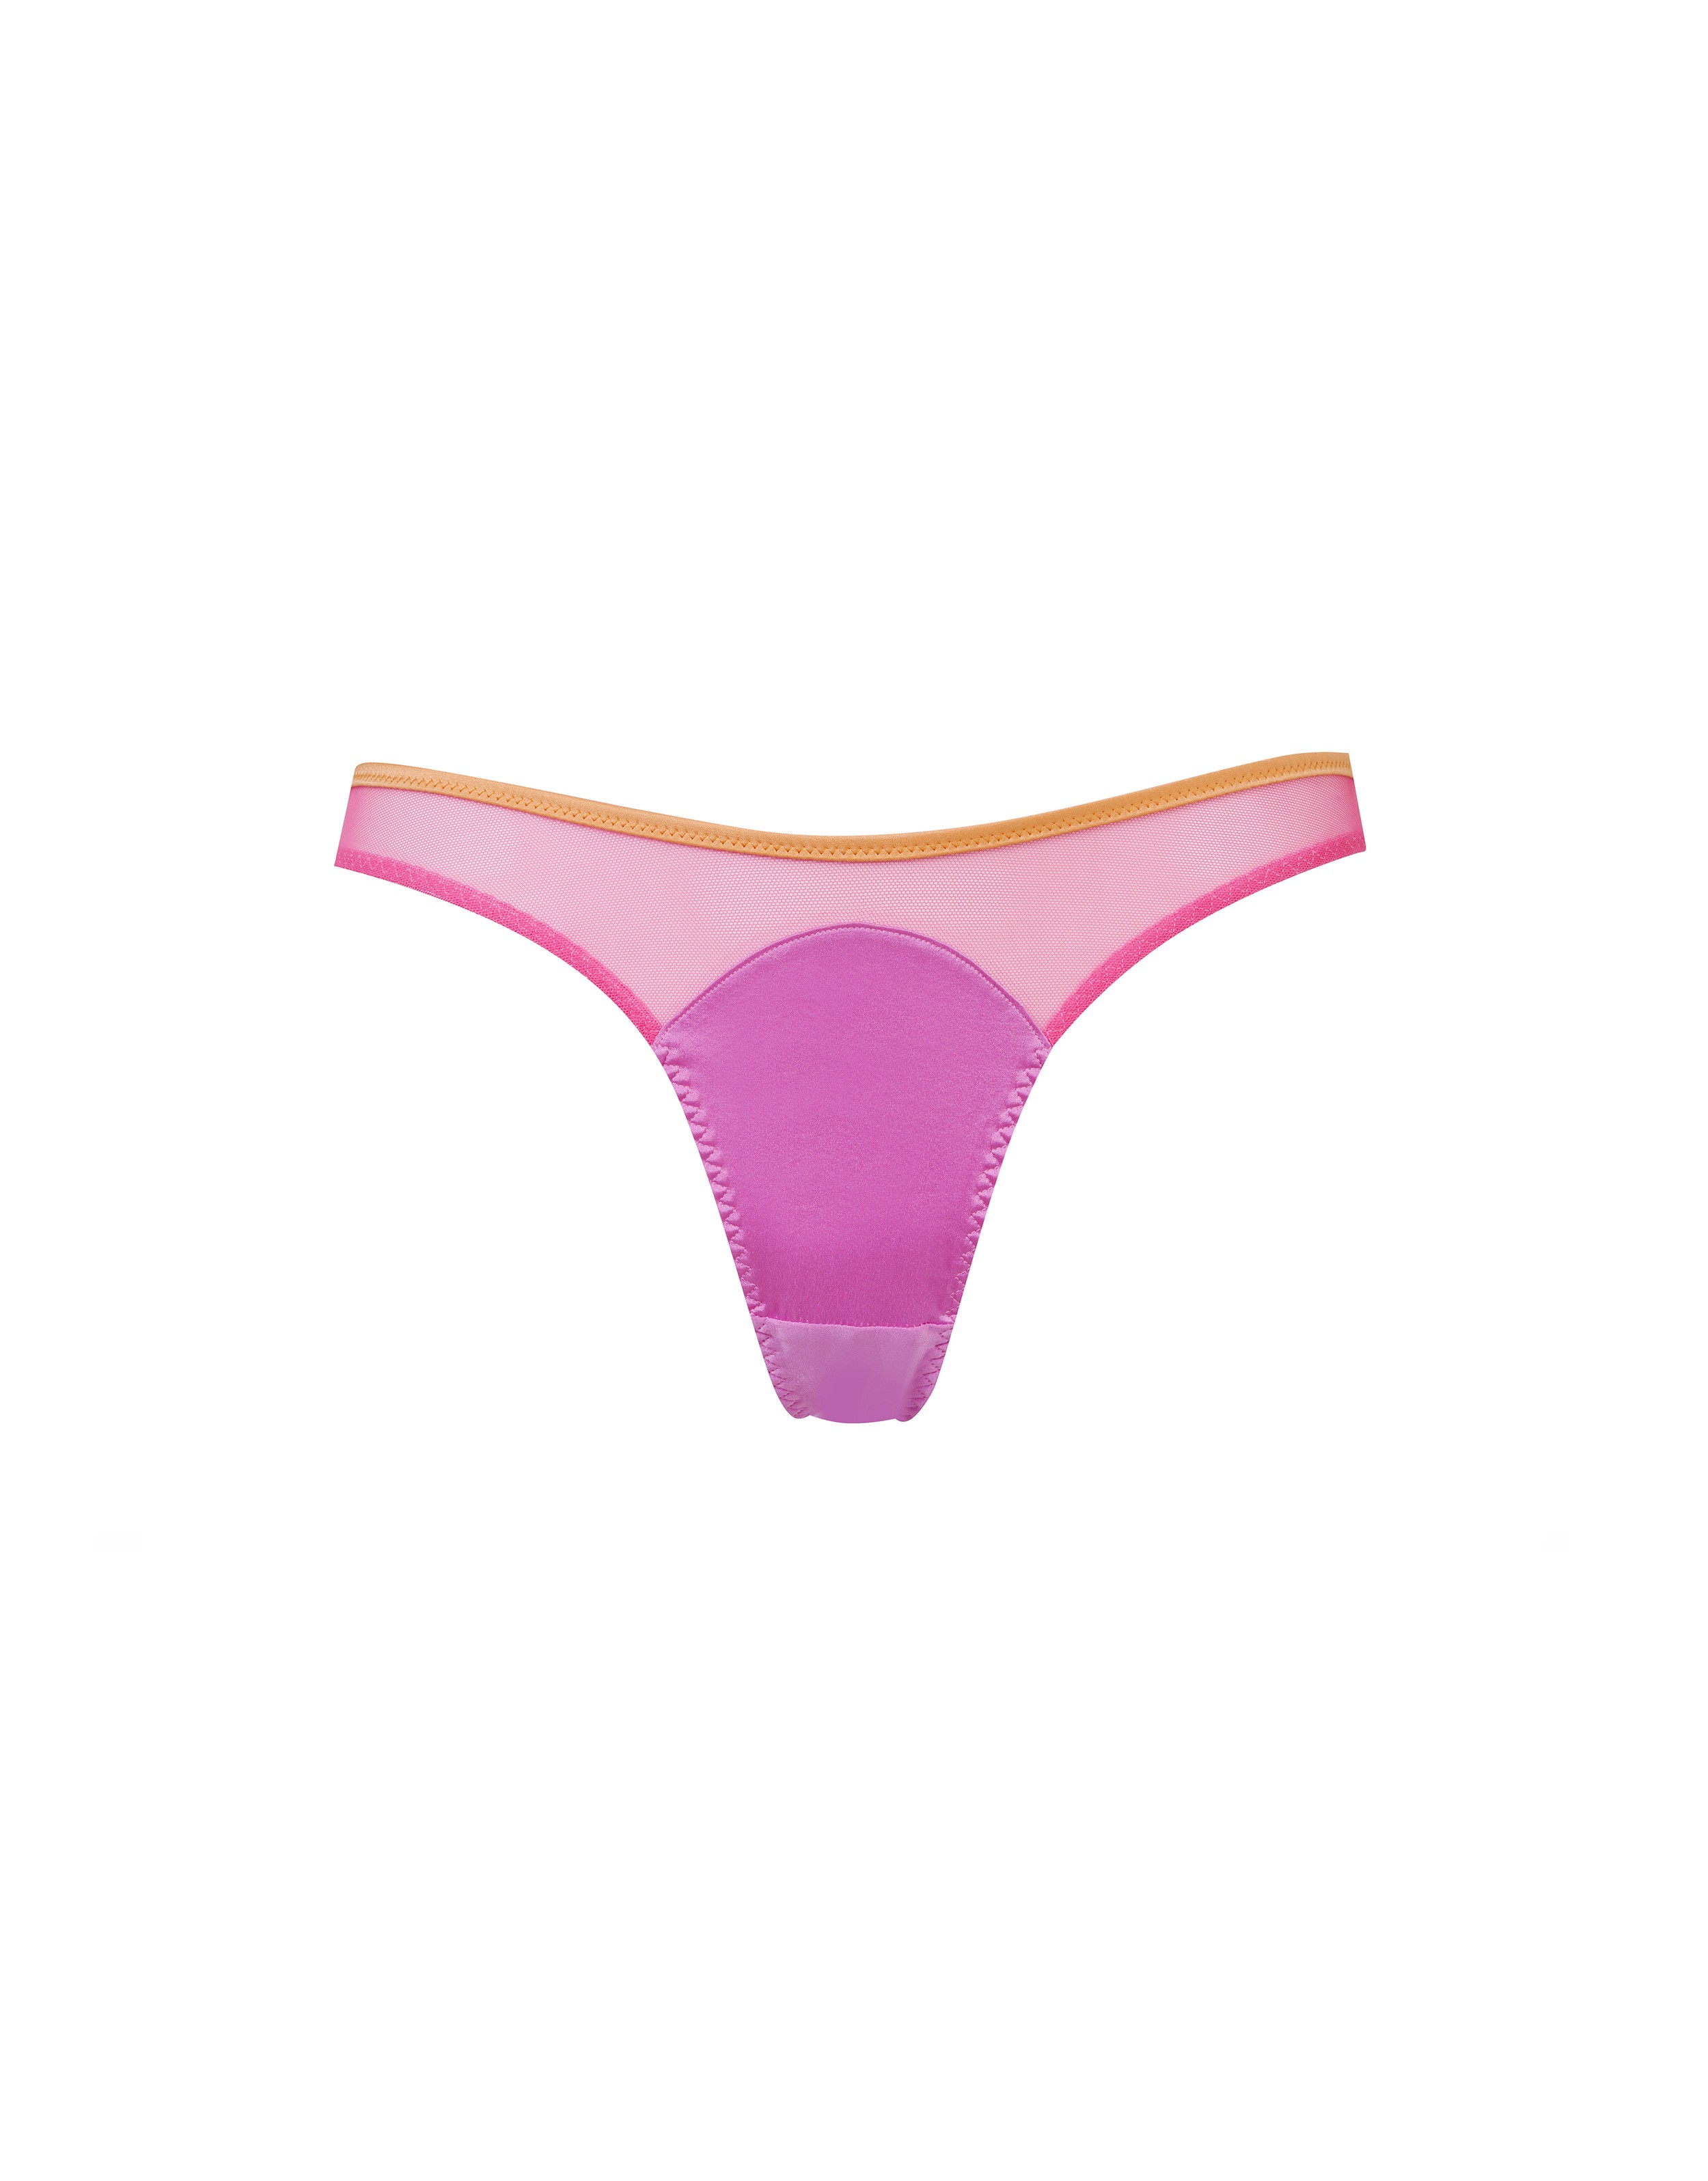 Viv Thong in Pink | Agent Provocateur